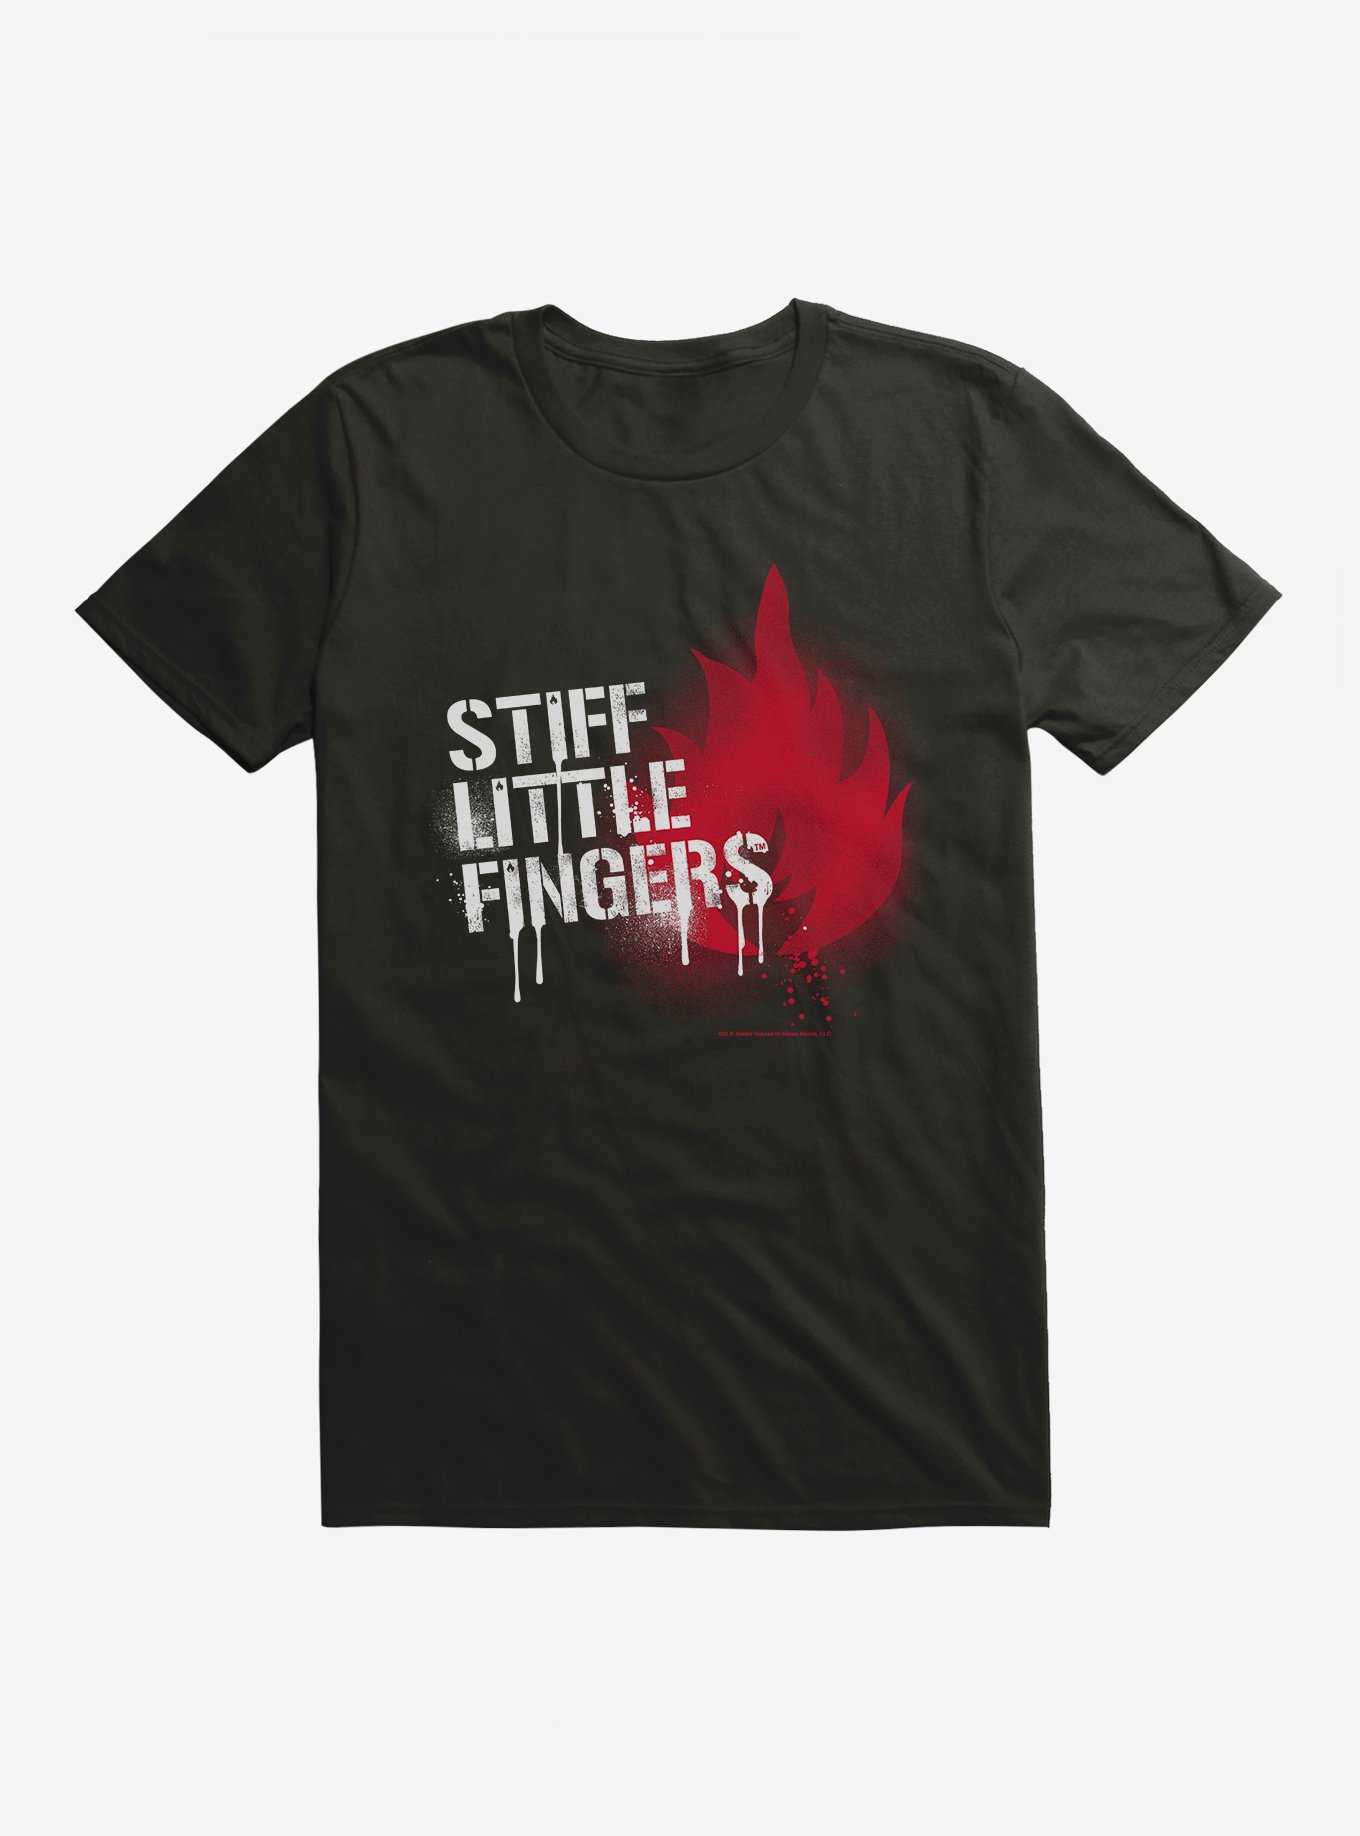 Stiff Little Fingers Inflammable Material T-Shirt, , hi-res